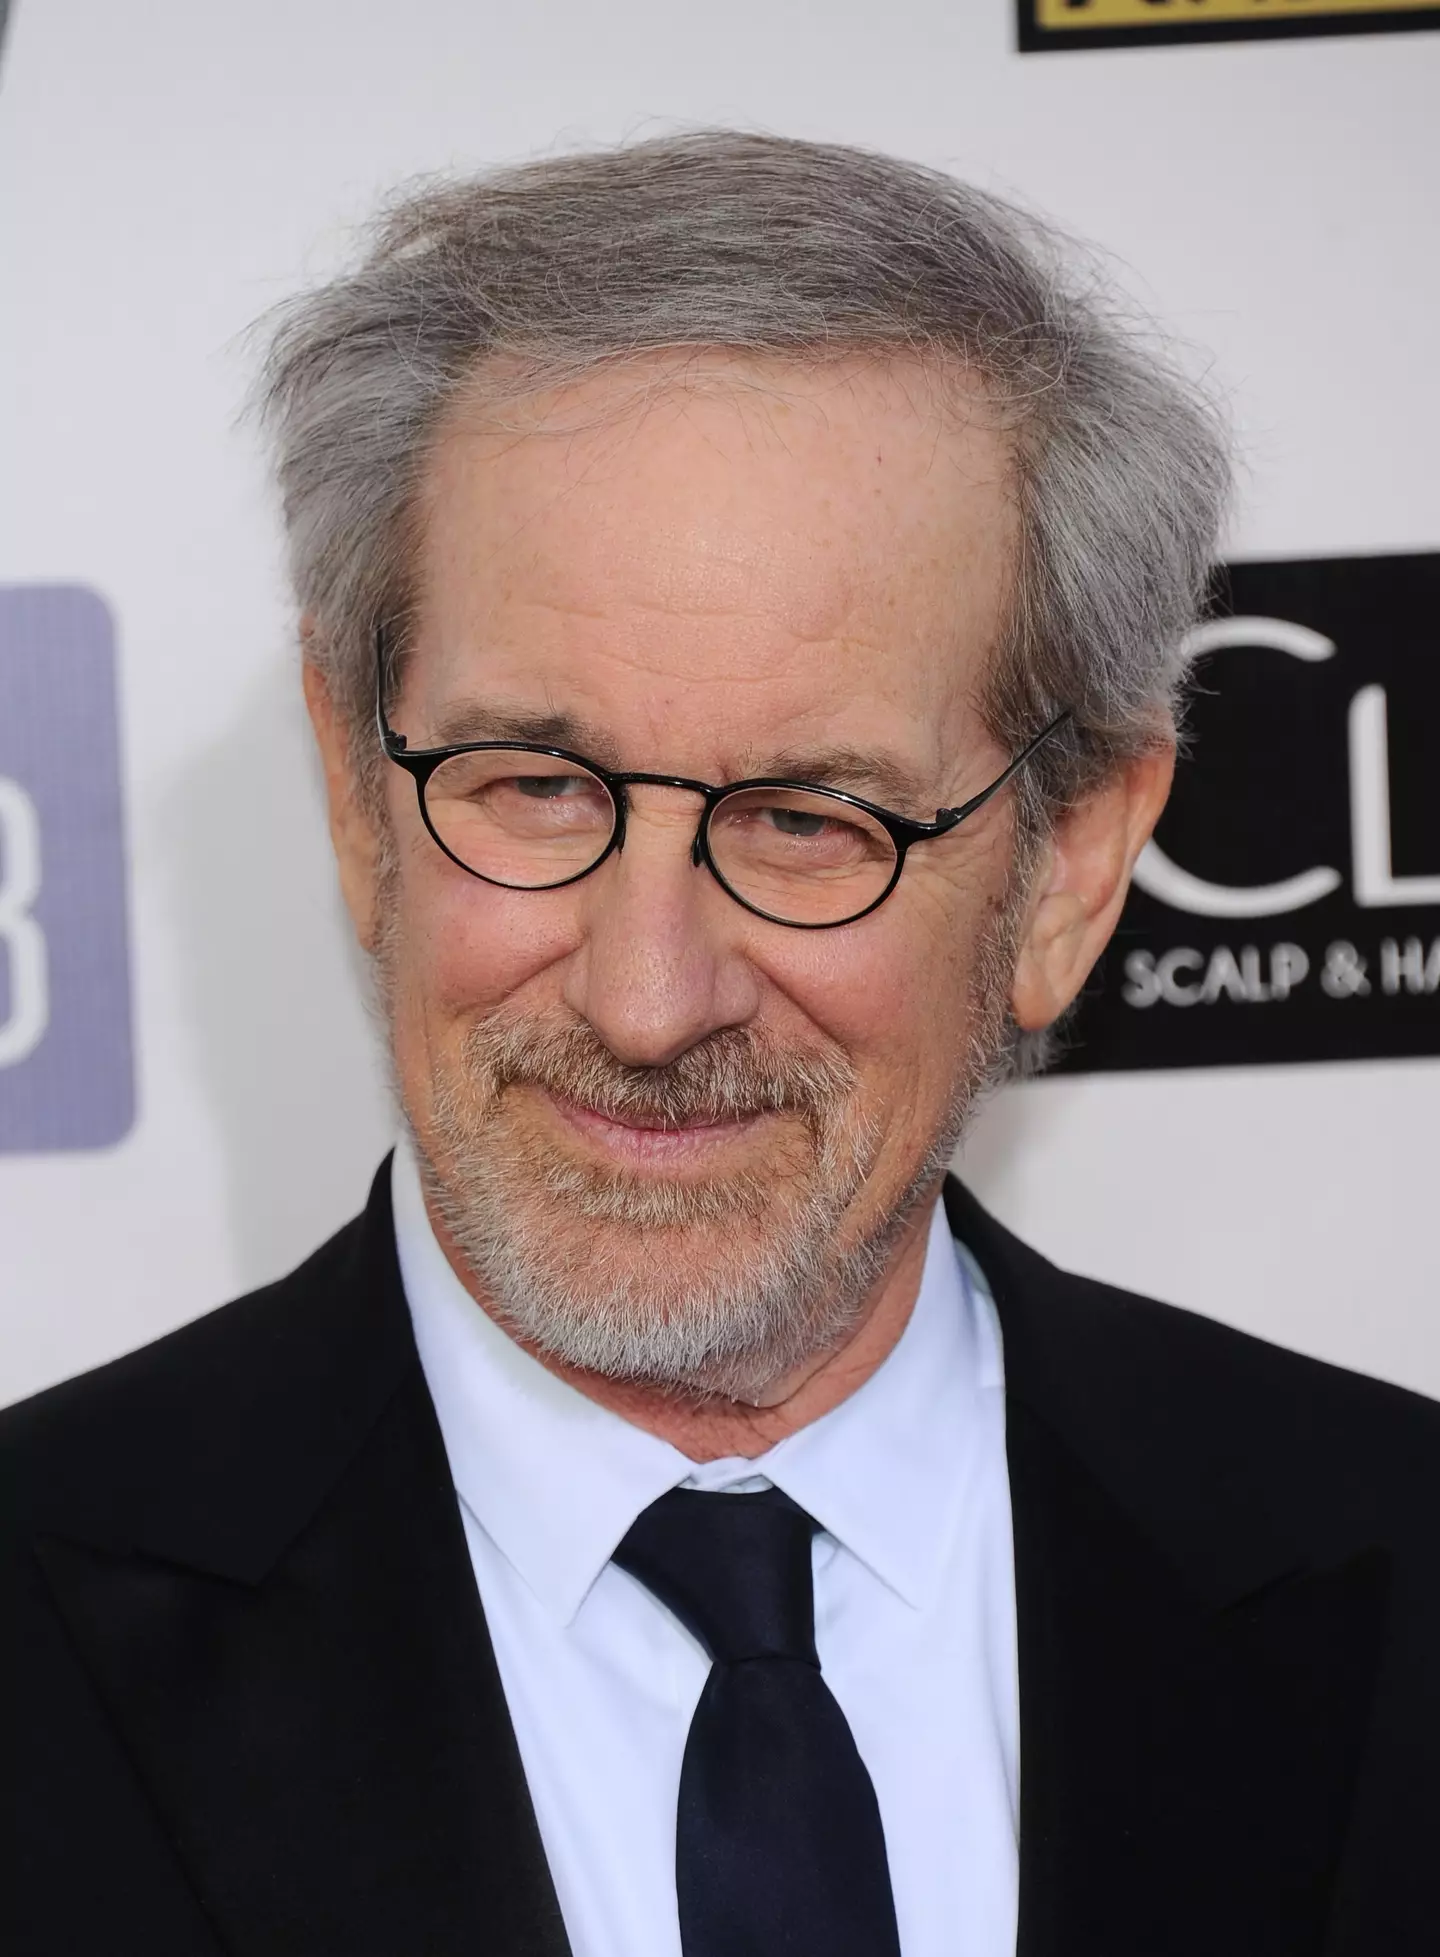 Steven Spielberg said he's afraid sharks might be 'mad at him'.